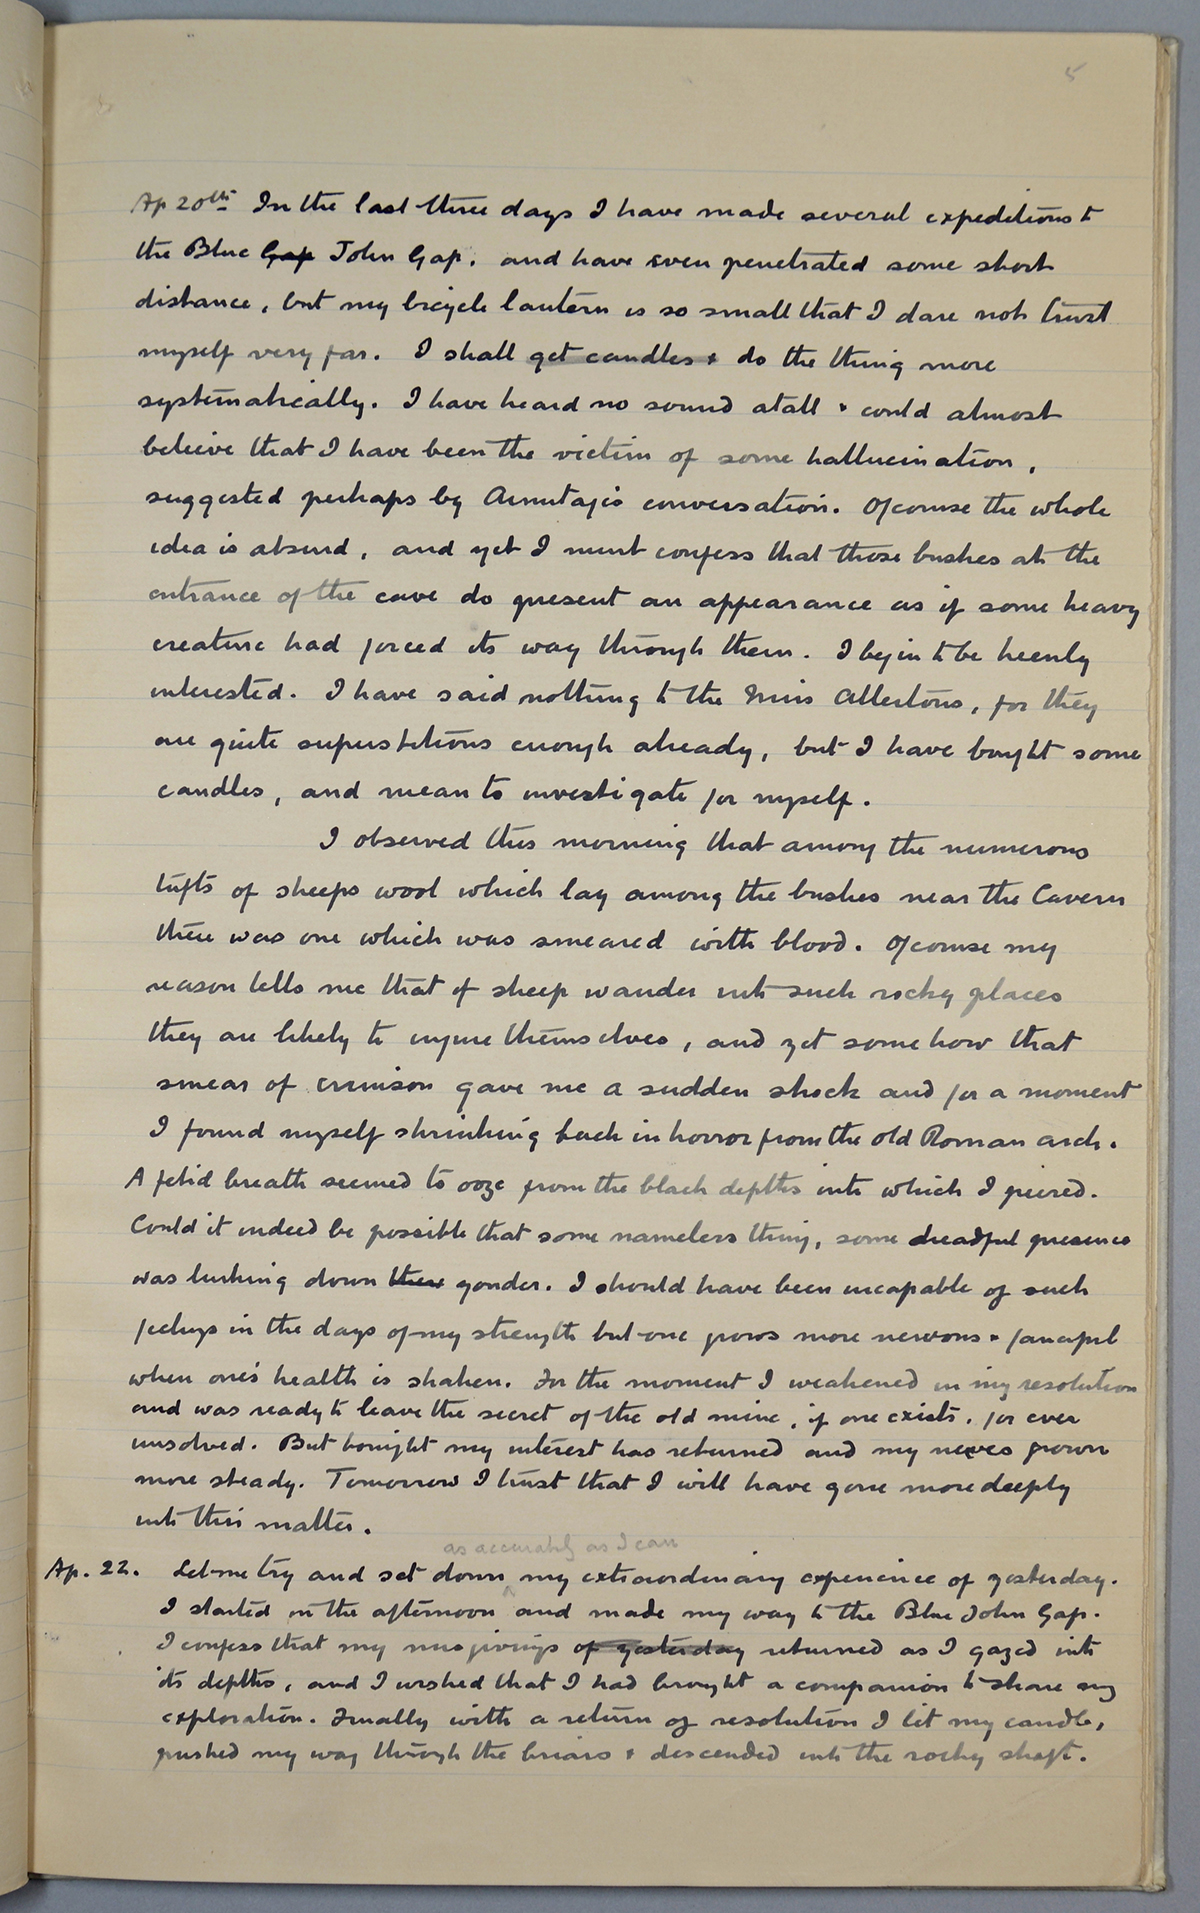 page 5 of the manuscript of "The Terror of Blue John Gap"